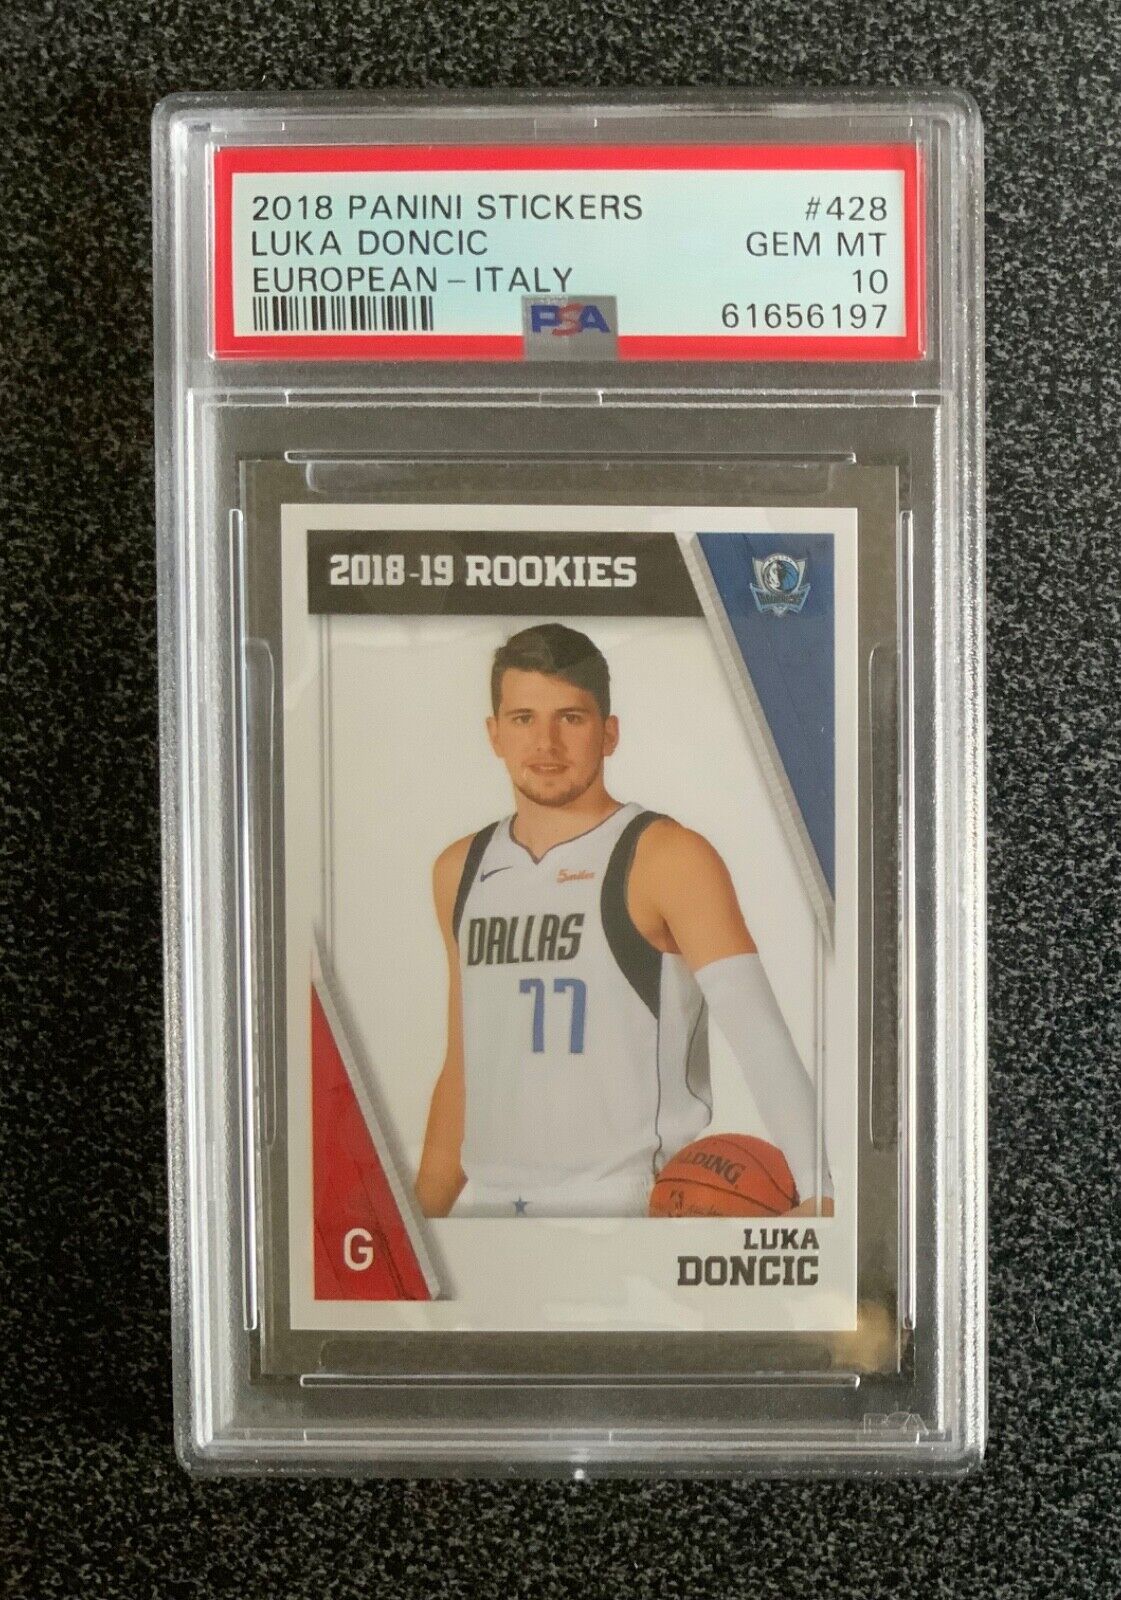 2018-2019 Panini Stickers Luka Doncic European-Italy #428 PSA 10 RC ROOKIE